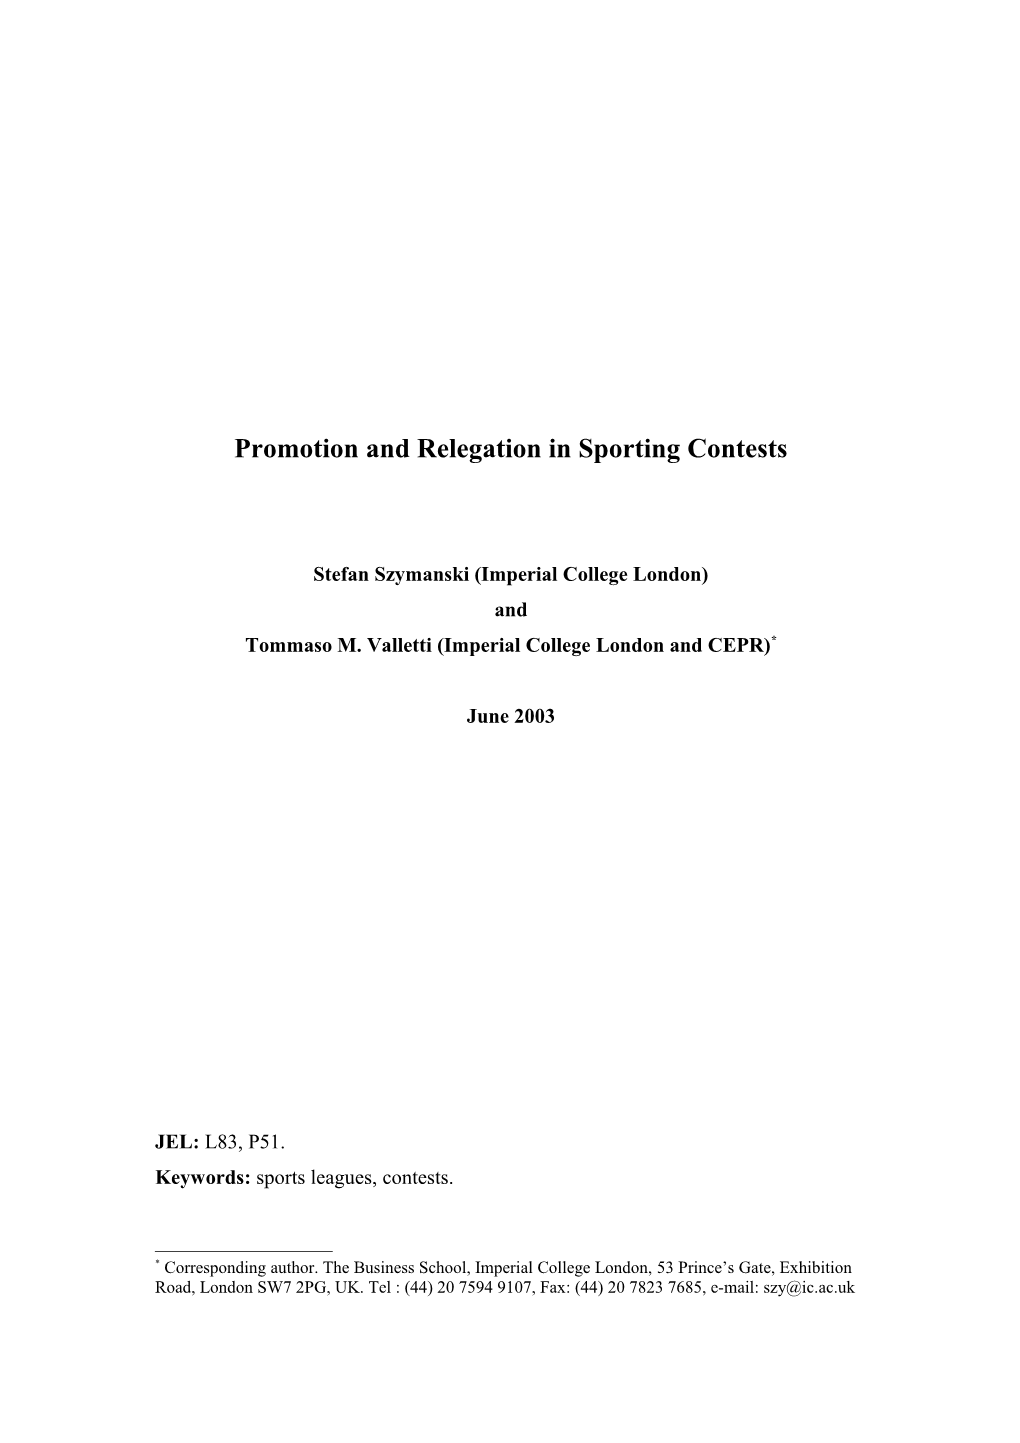 Promotion and Relegation in Sporting Contests